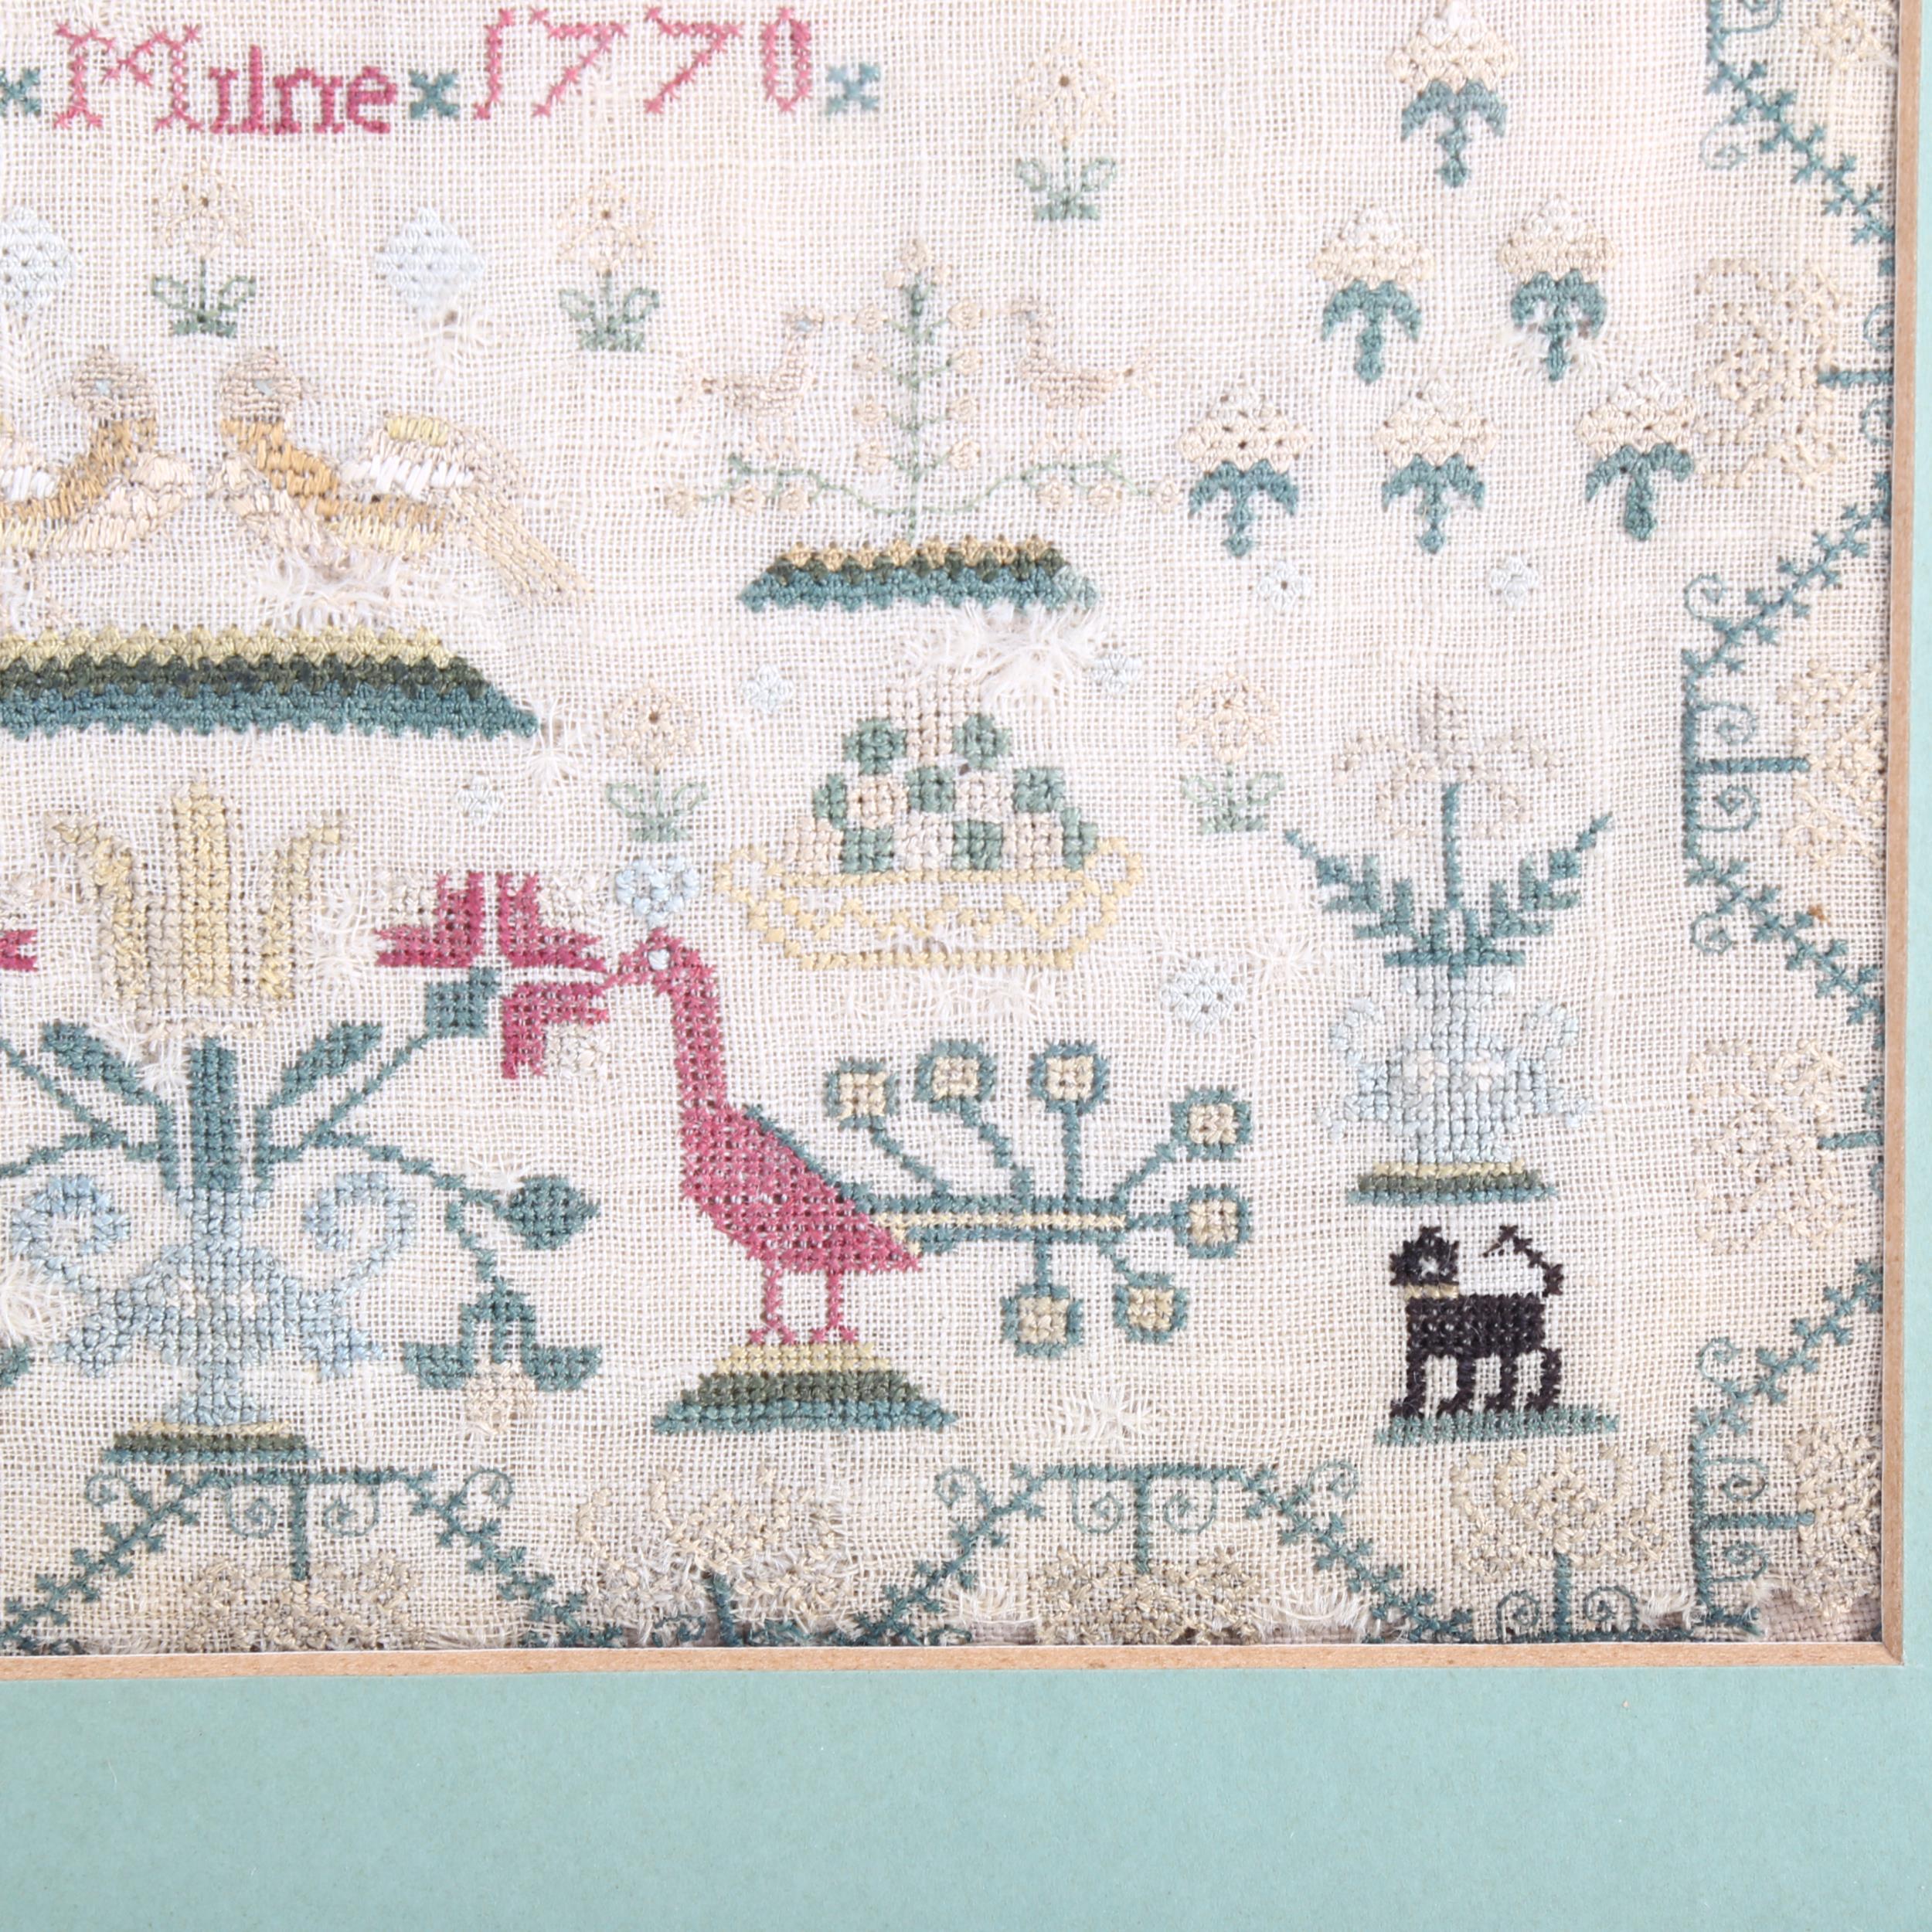 An 18th century needlework sampler, by Christian Milne 1770, 30cm x 26cm Several small holes in - Image 2 of 3